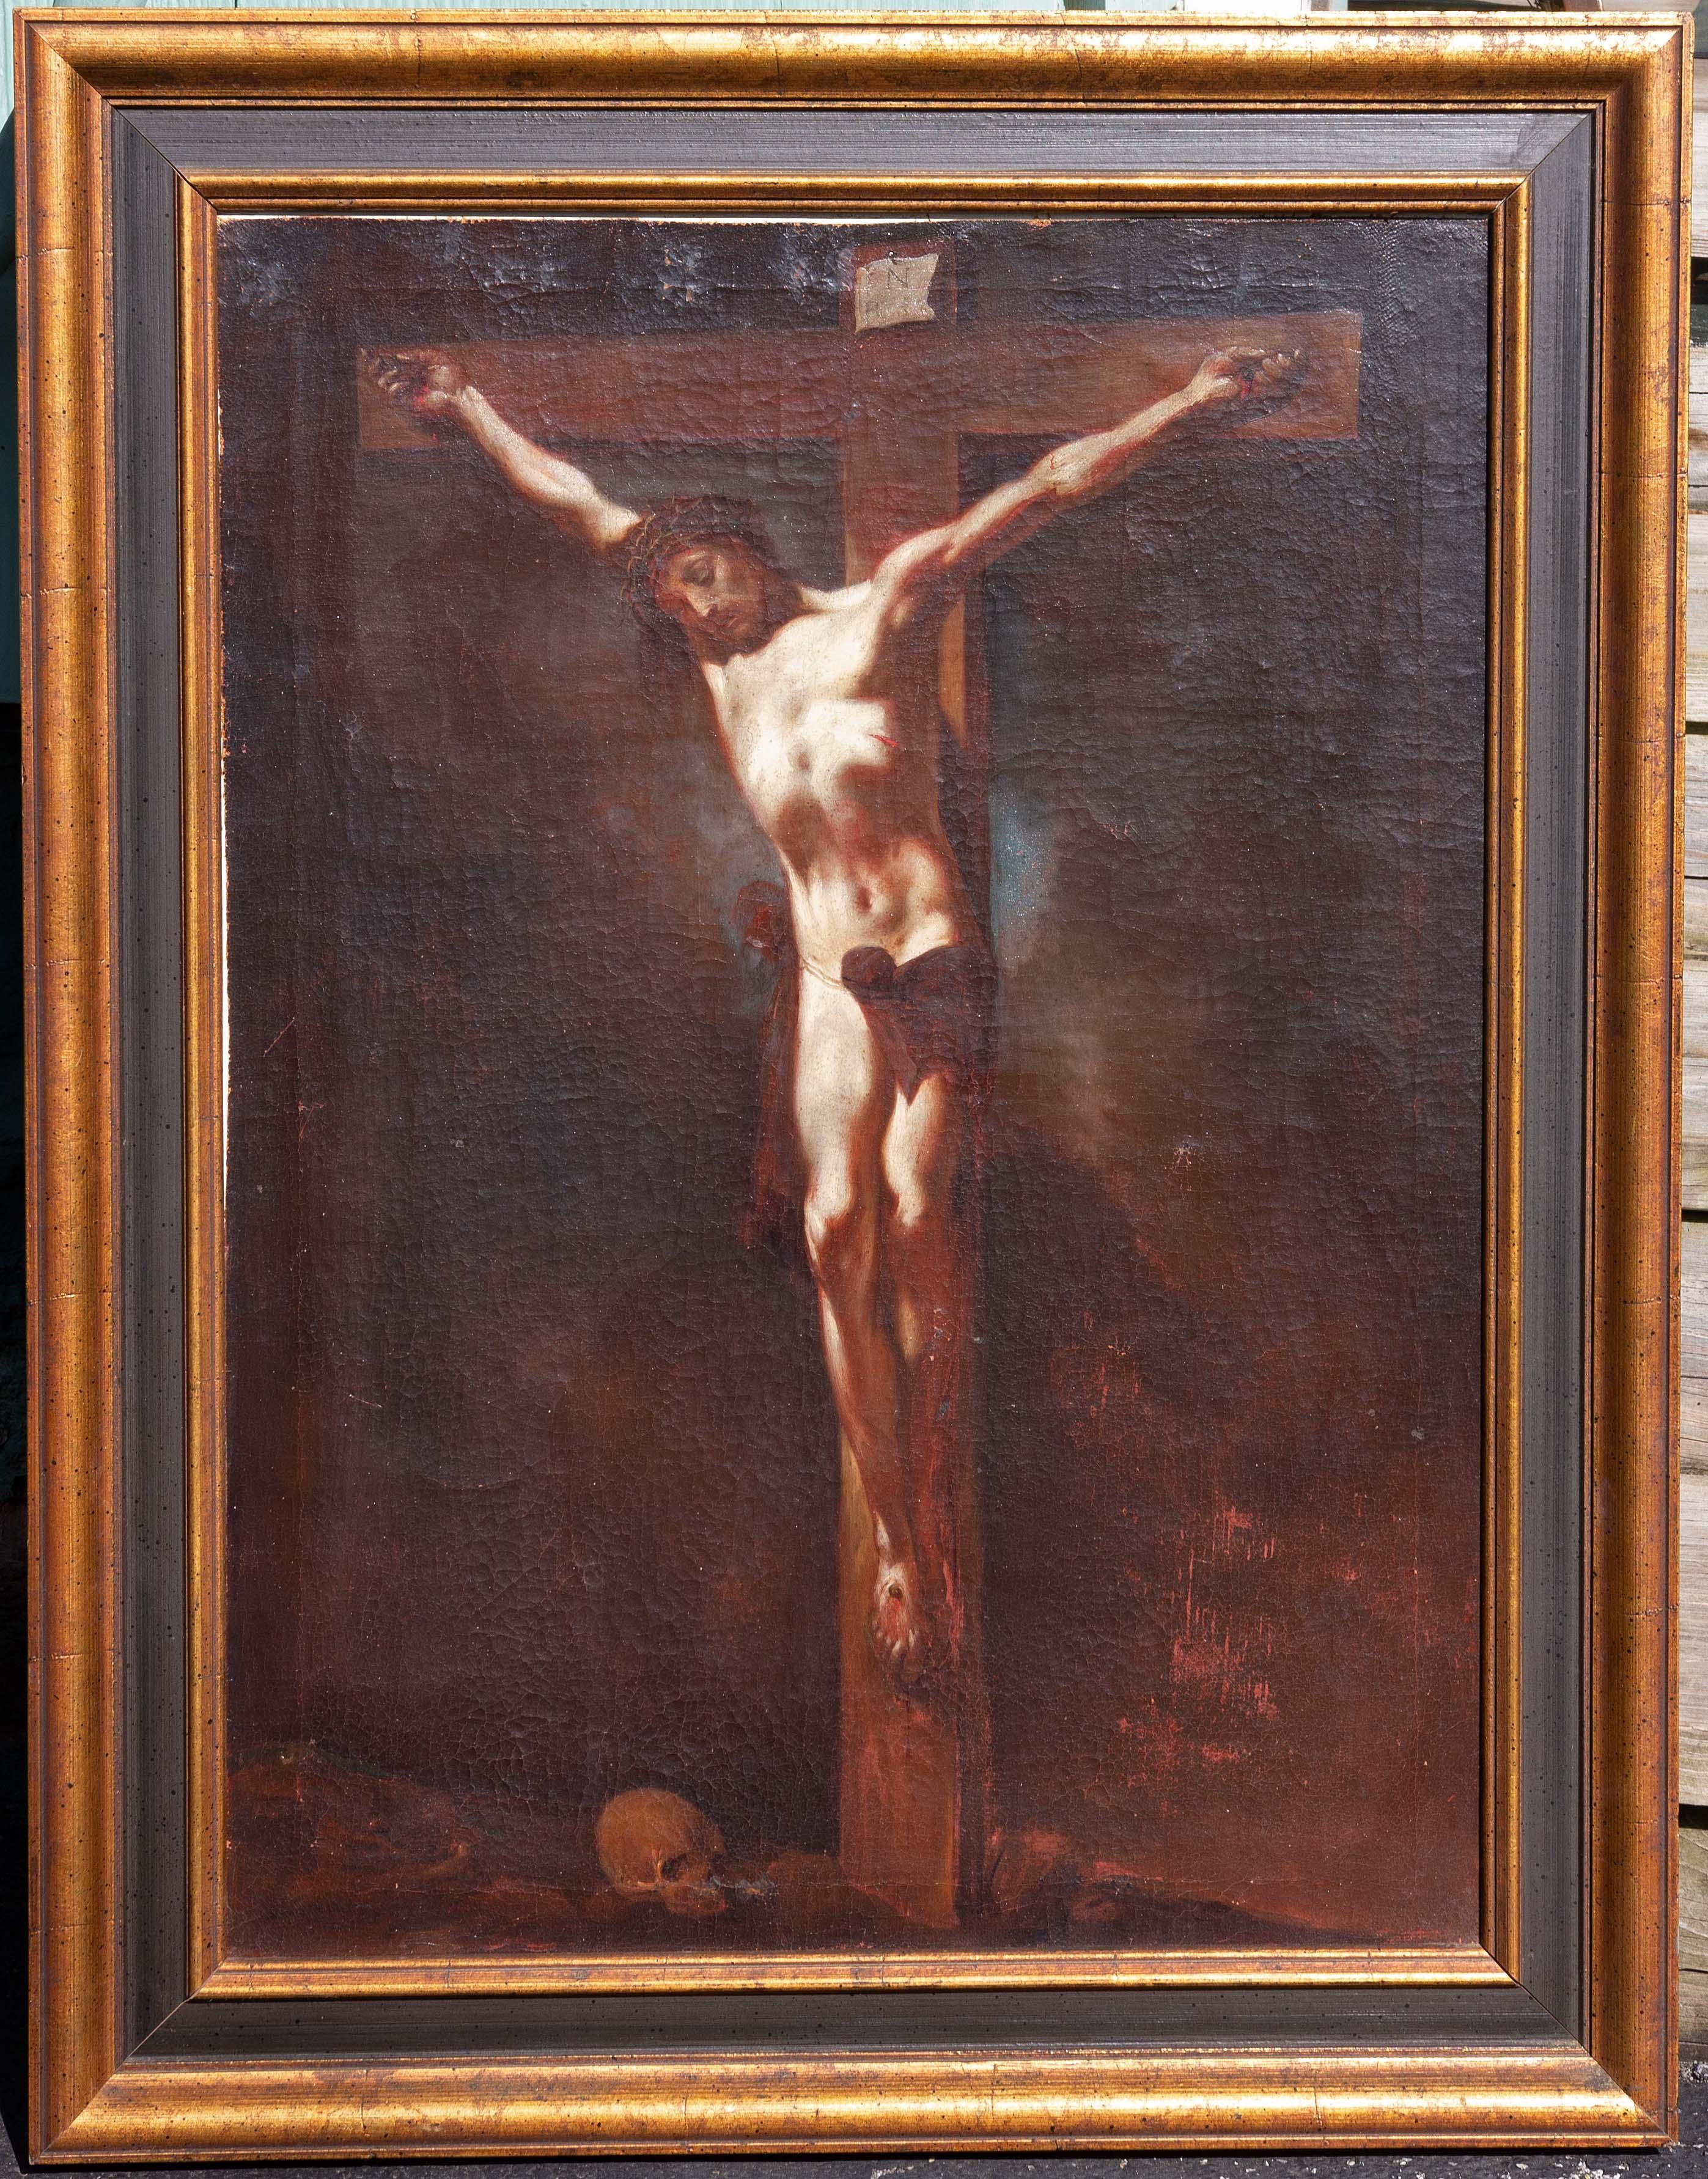 The crucifixion of Crist Italian school 17th or 18th century. Beautiful detail in the face and hands. The lighting makes the figure of Crist seem to glow. In a good quality later frame. 
Presented.

